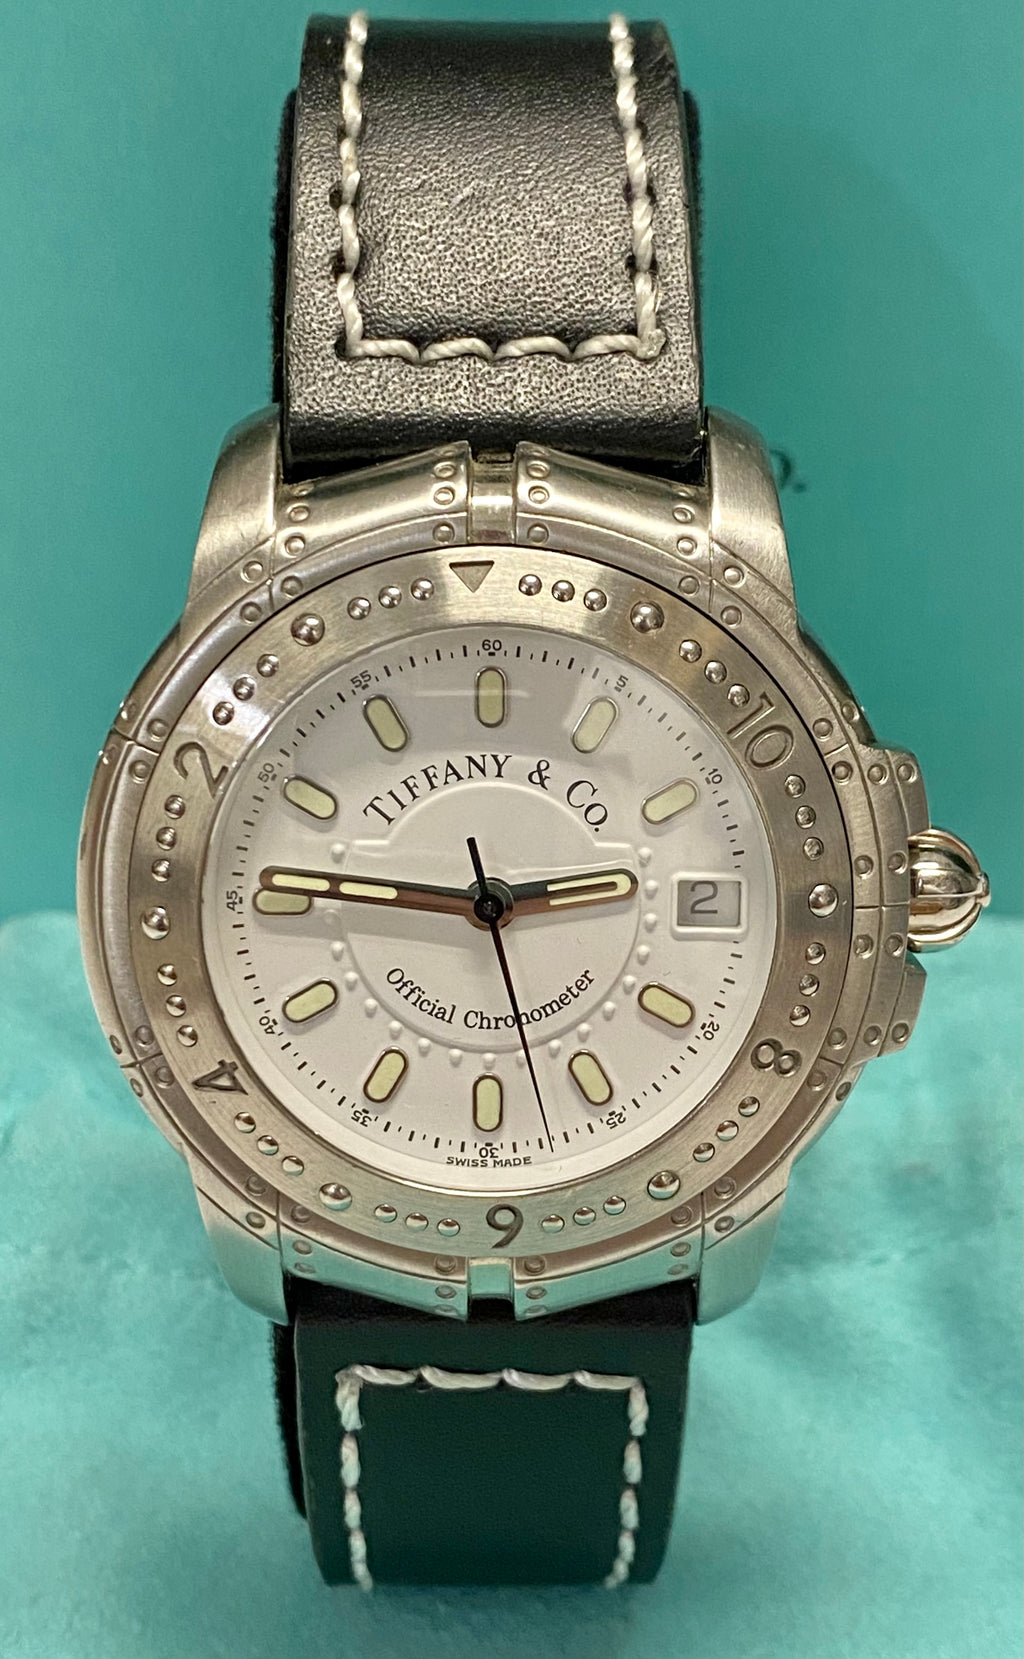 TIFFANY & CO. Chronometer Automatic Watch Water Resistant Date